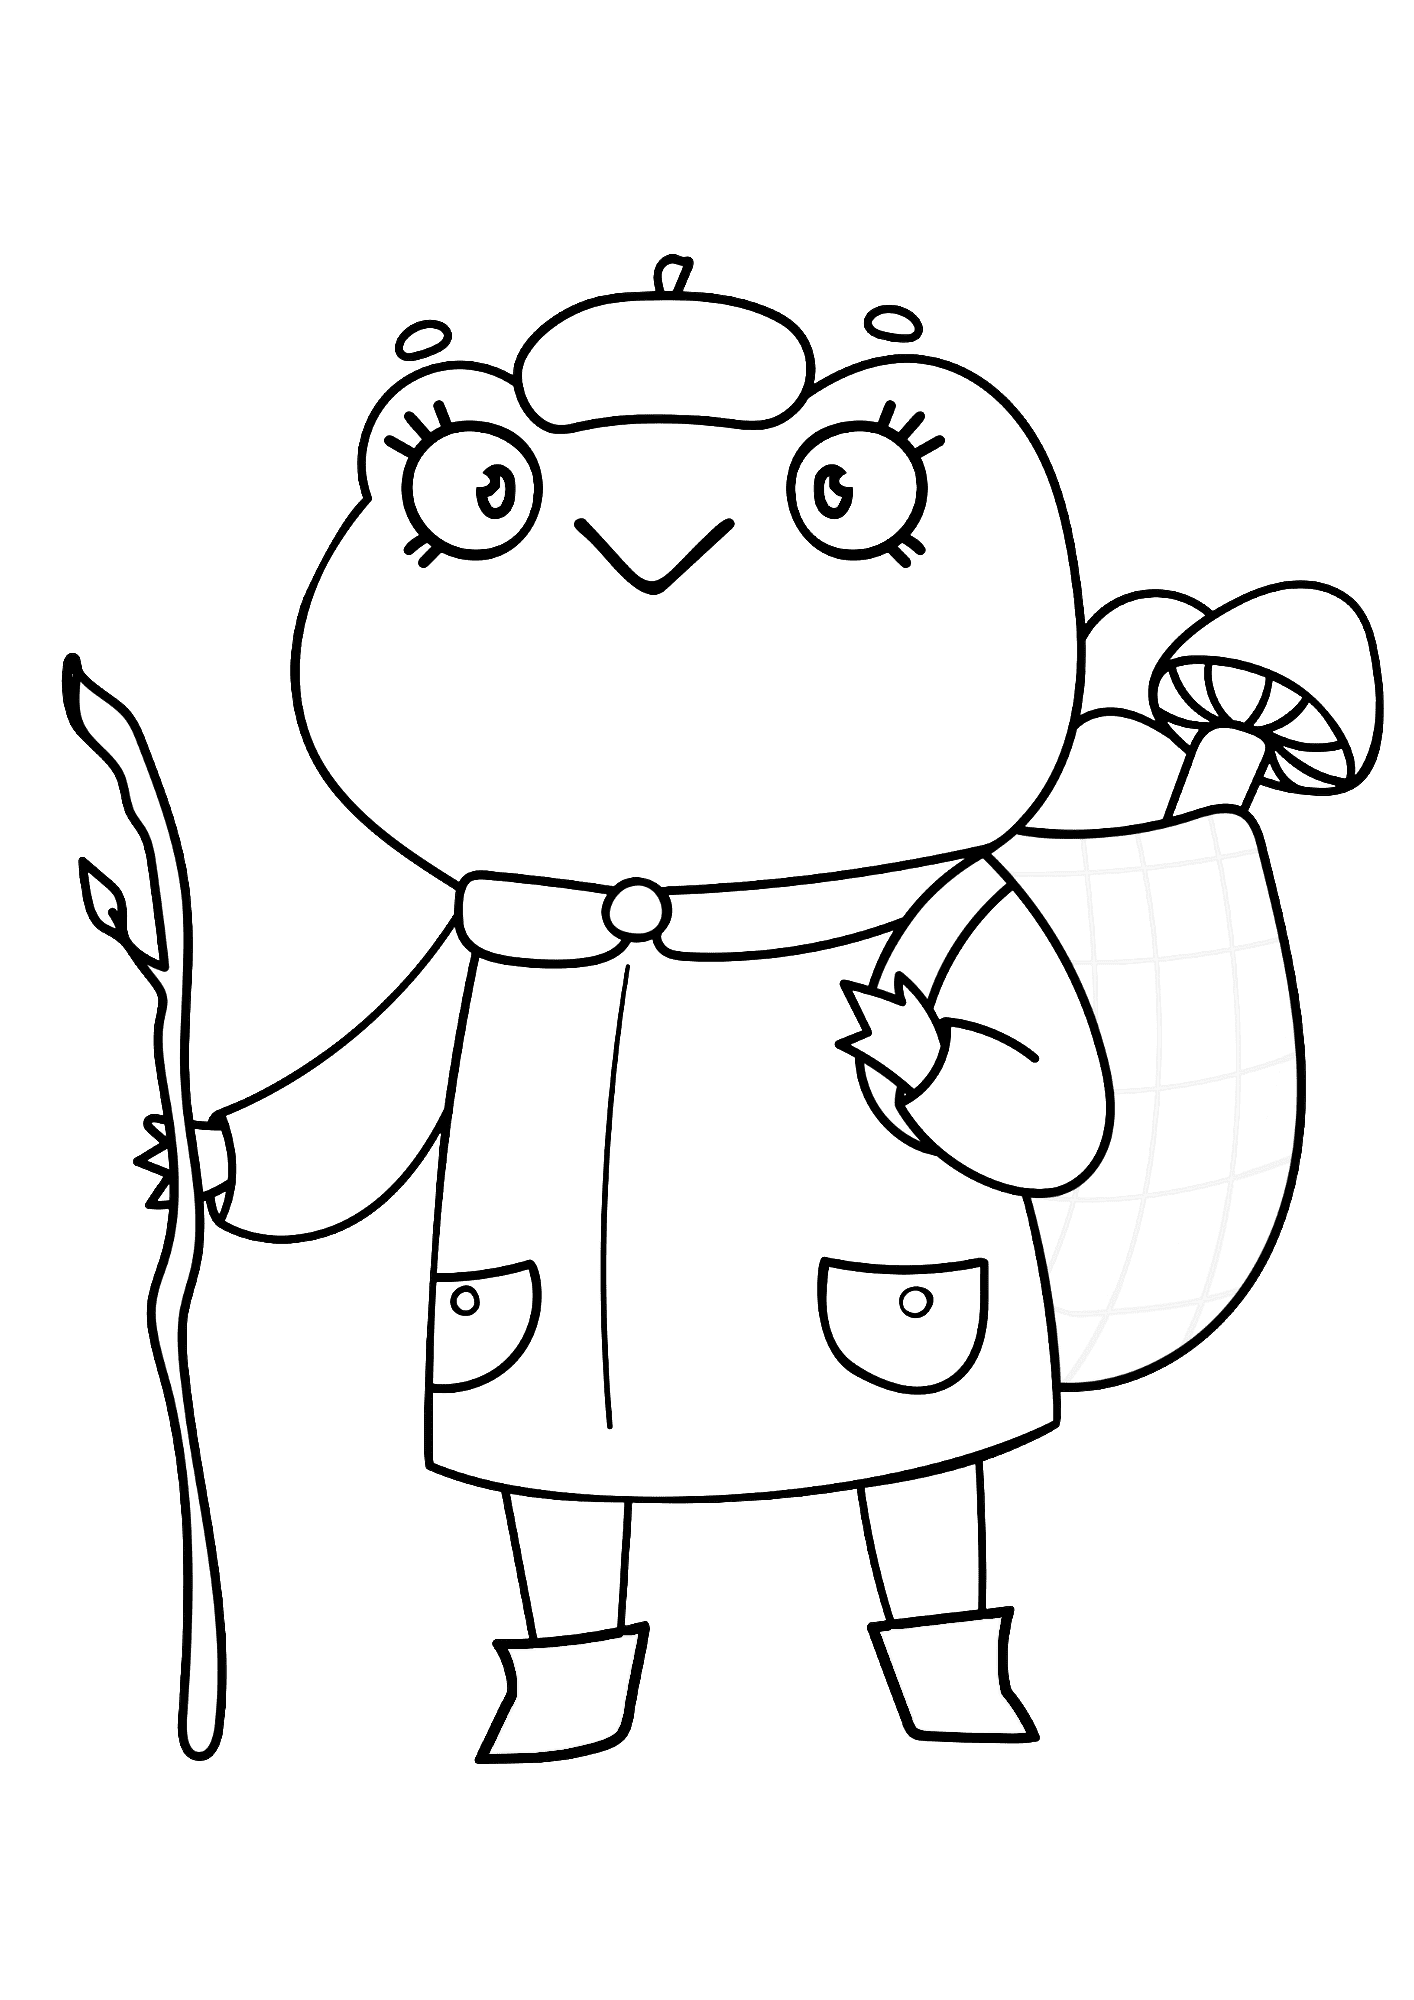 Preschool Frog Coloring Pages